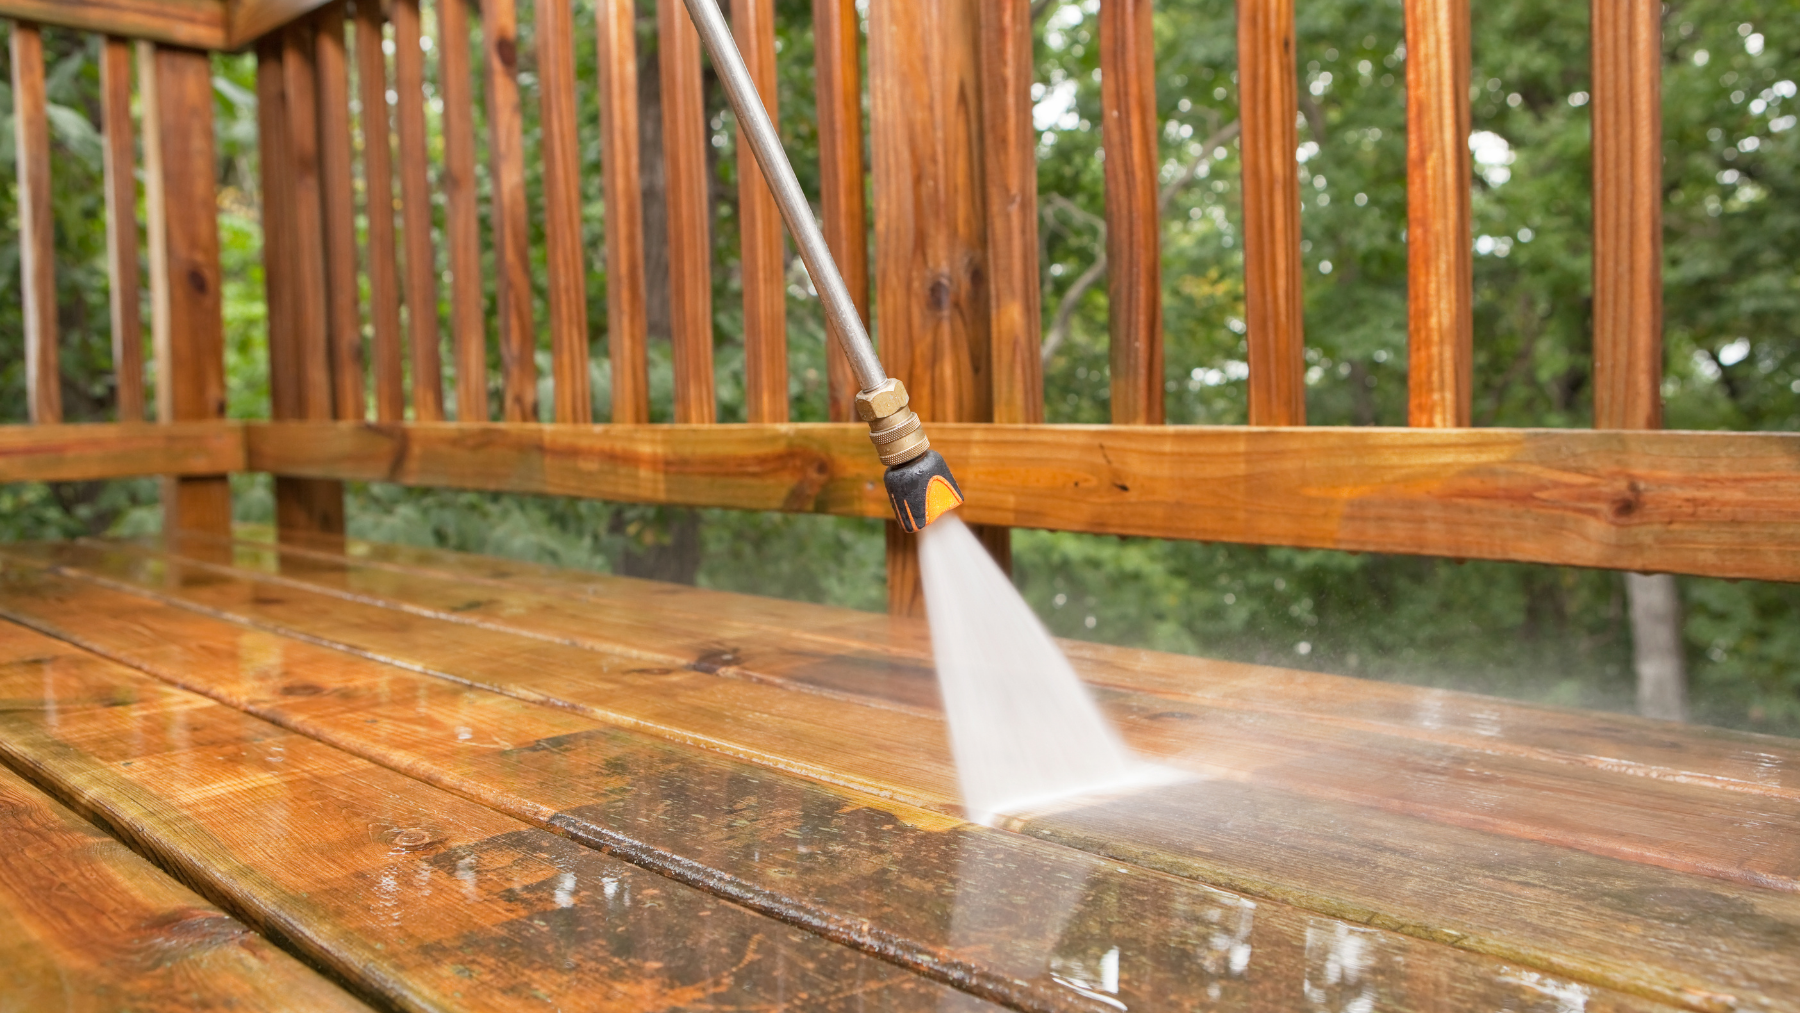 Deck Stains, Sealers & Cleaners